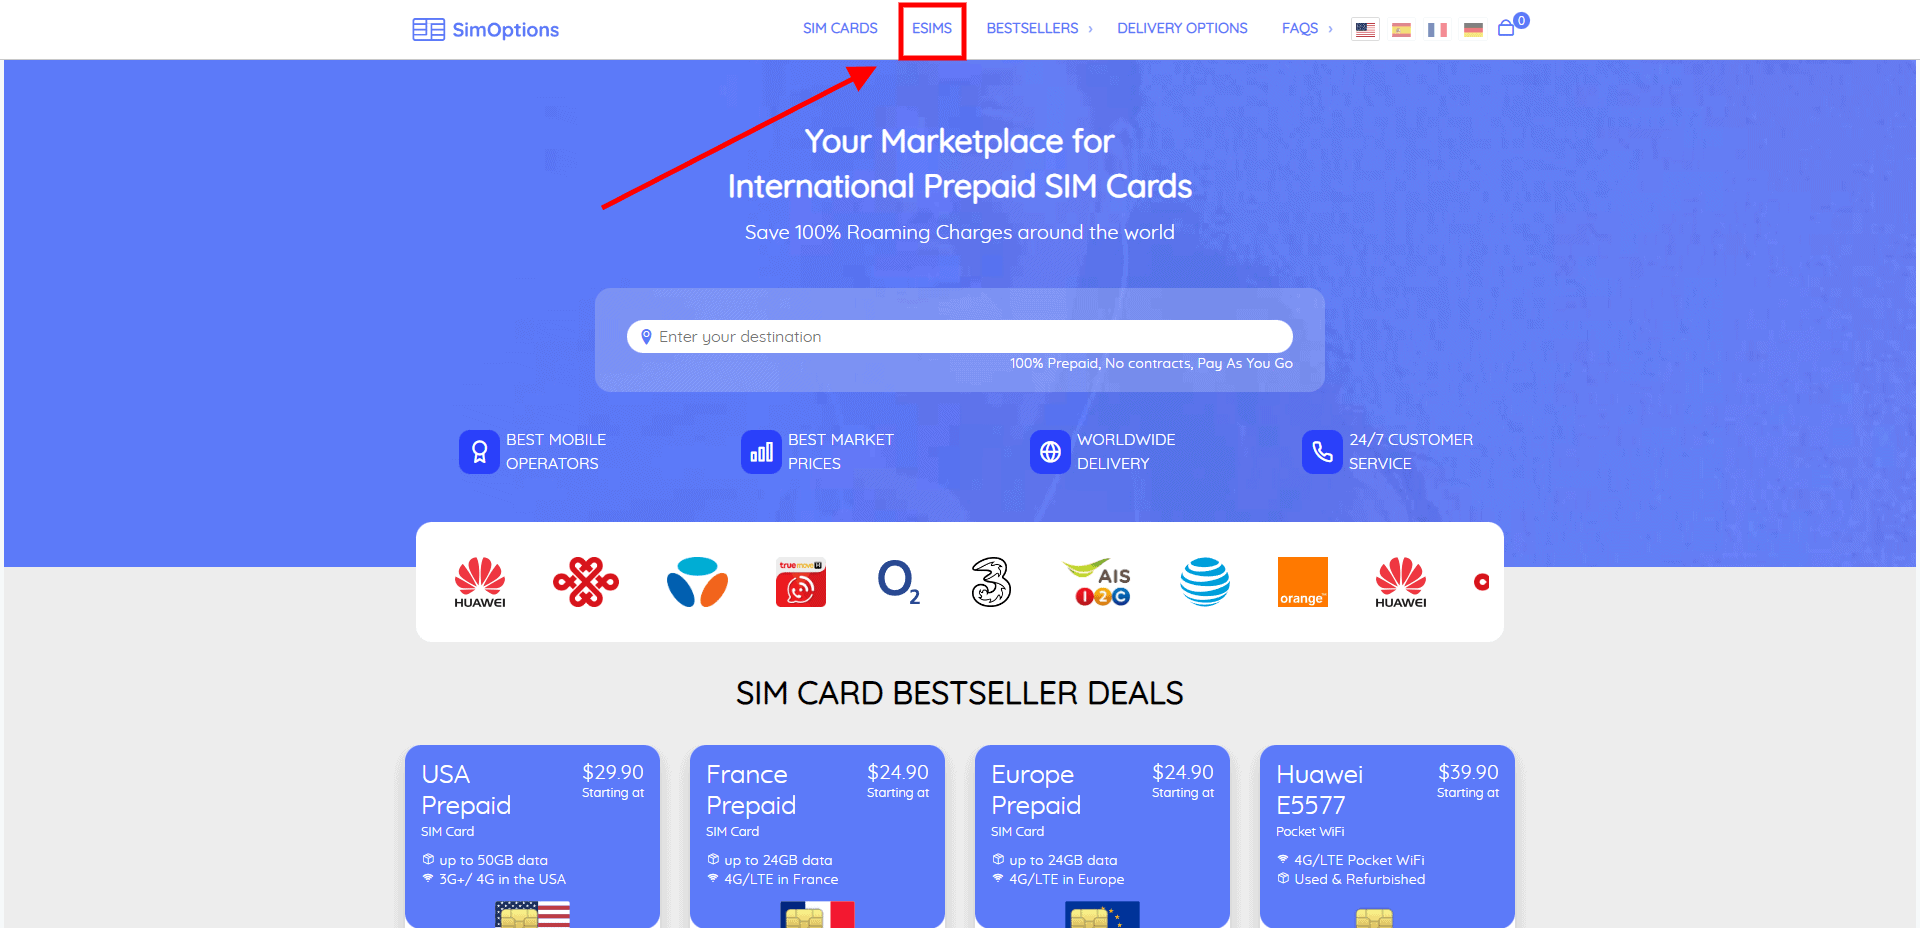 simoptions homepage with a red arrow pointing to esims